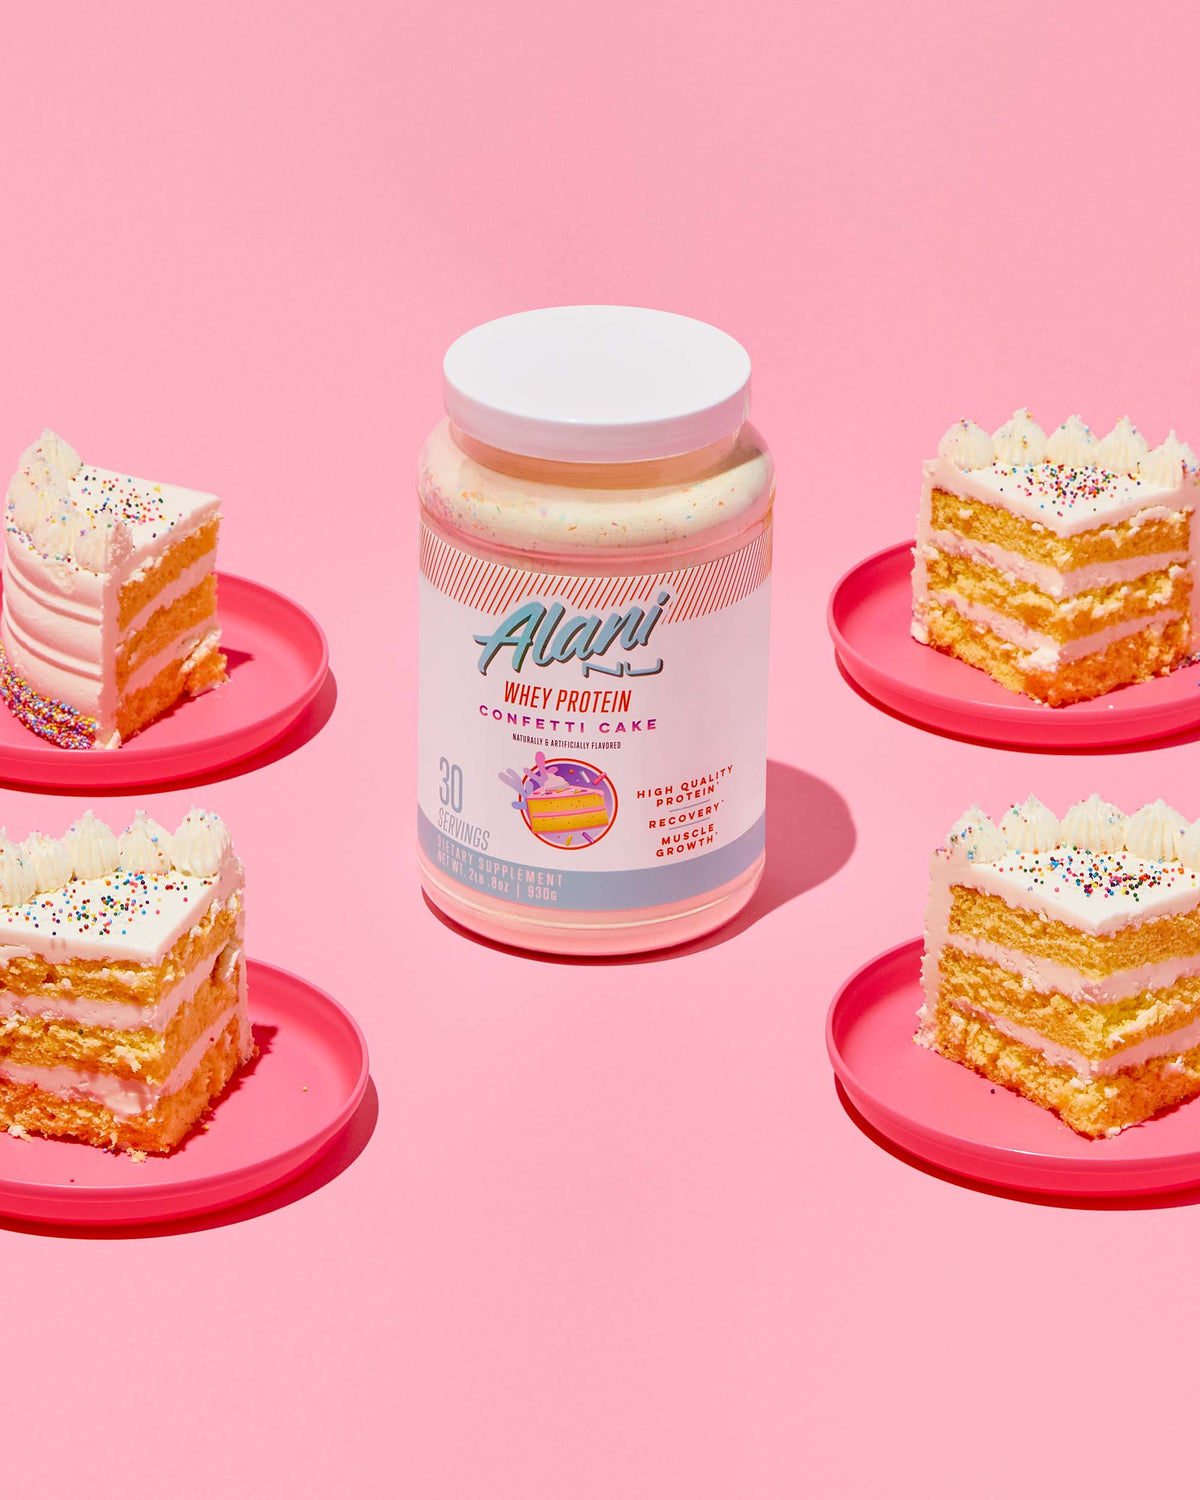 A pink plate topped with a piece of Cake next to a container of Whey Protein in Confetti Cake flavor.